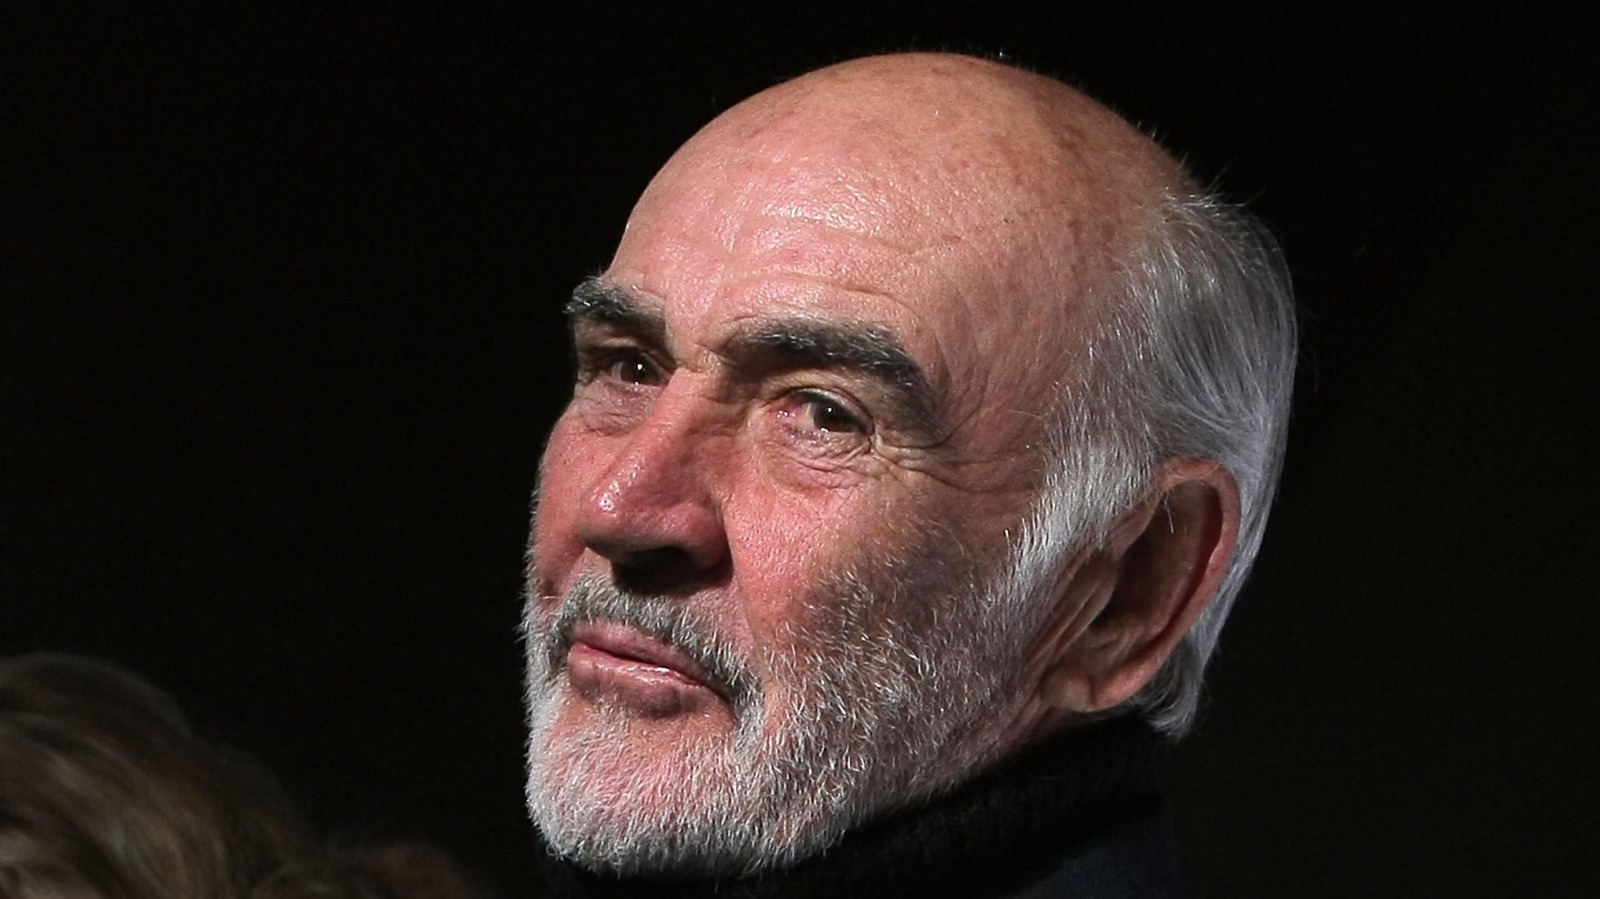 James Bond Cast Members React To Sean Connery's Death